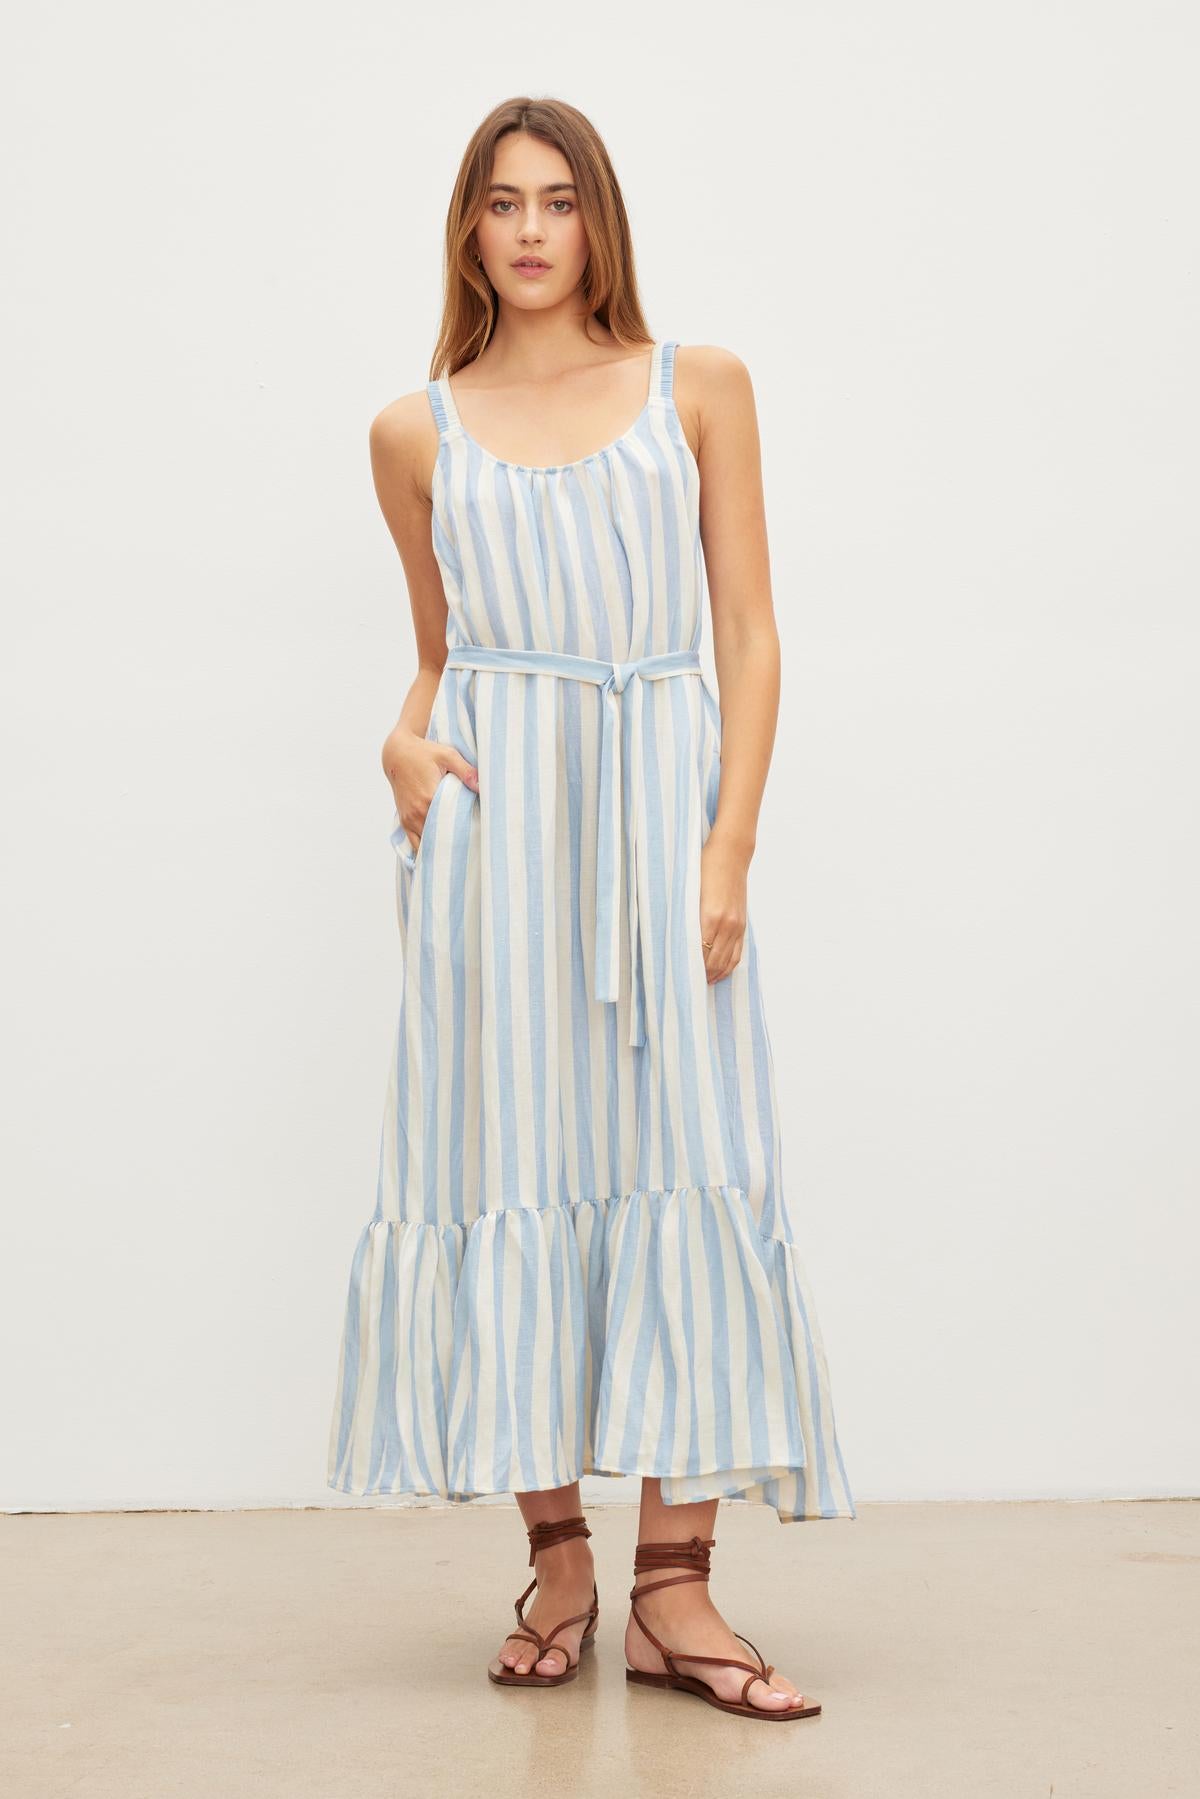 Woman standing against a plain background, wearing a Velvet by Graham & Spencer MERADITH STRIPED LINEN MAXI DRESS with ruffles and sandals.-36580695507137